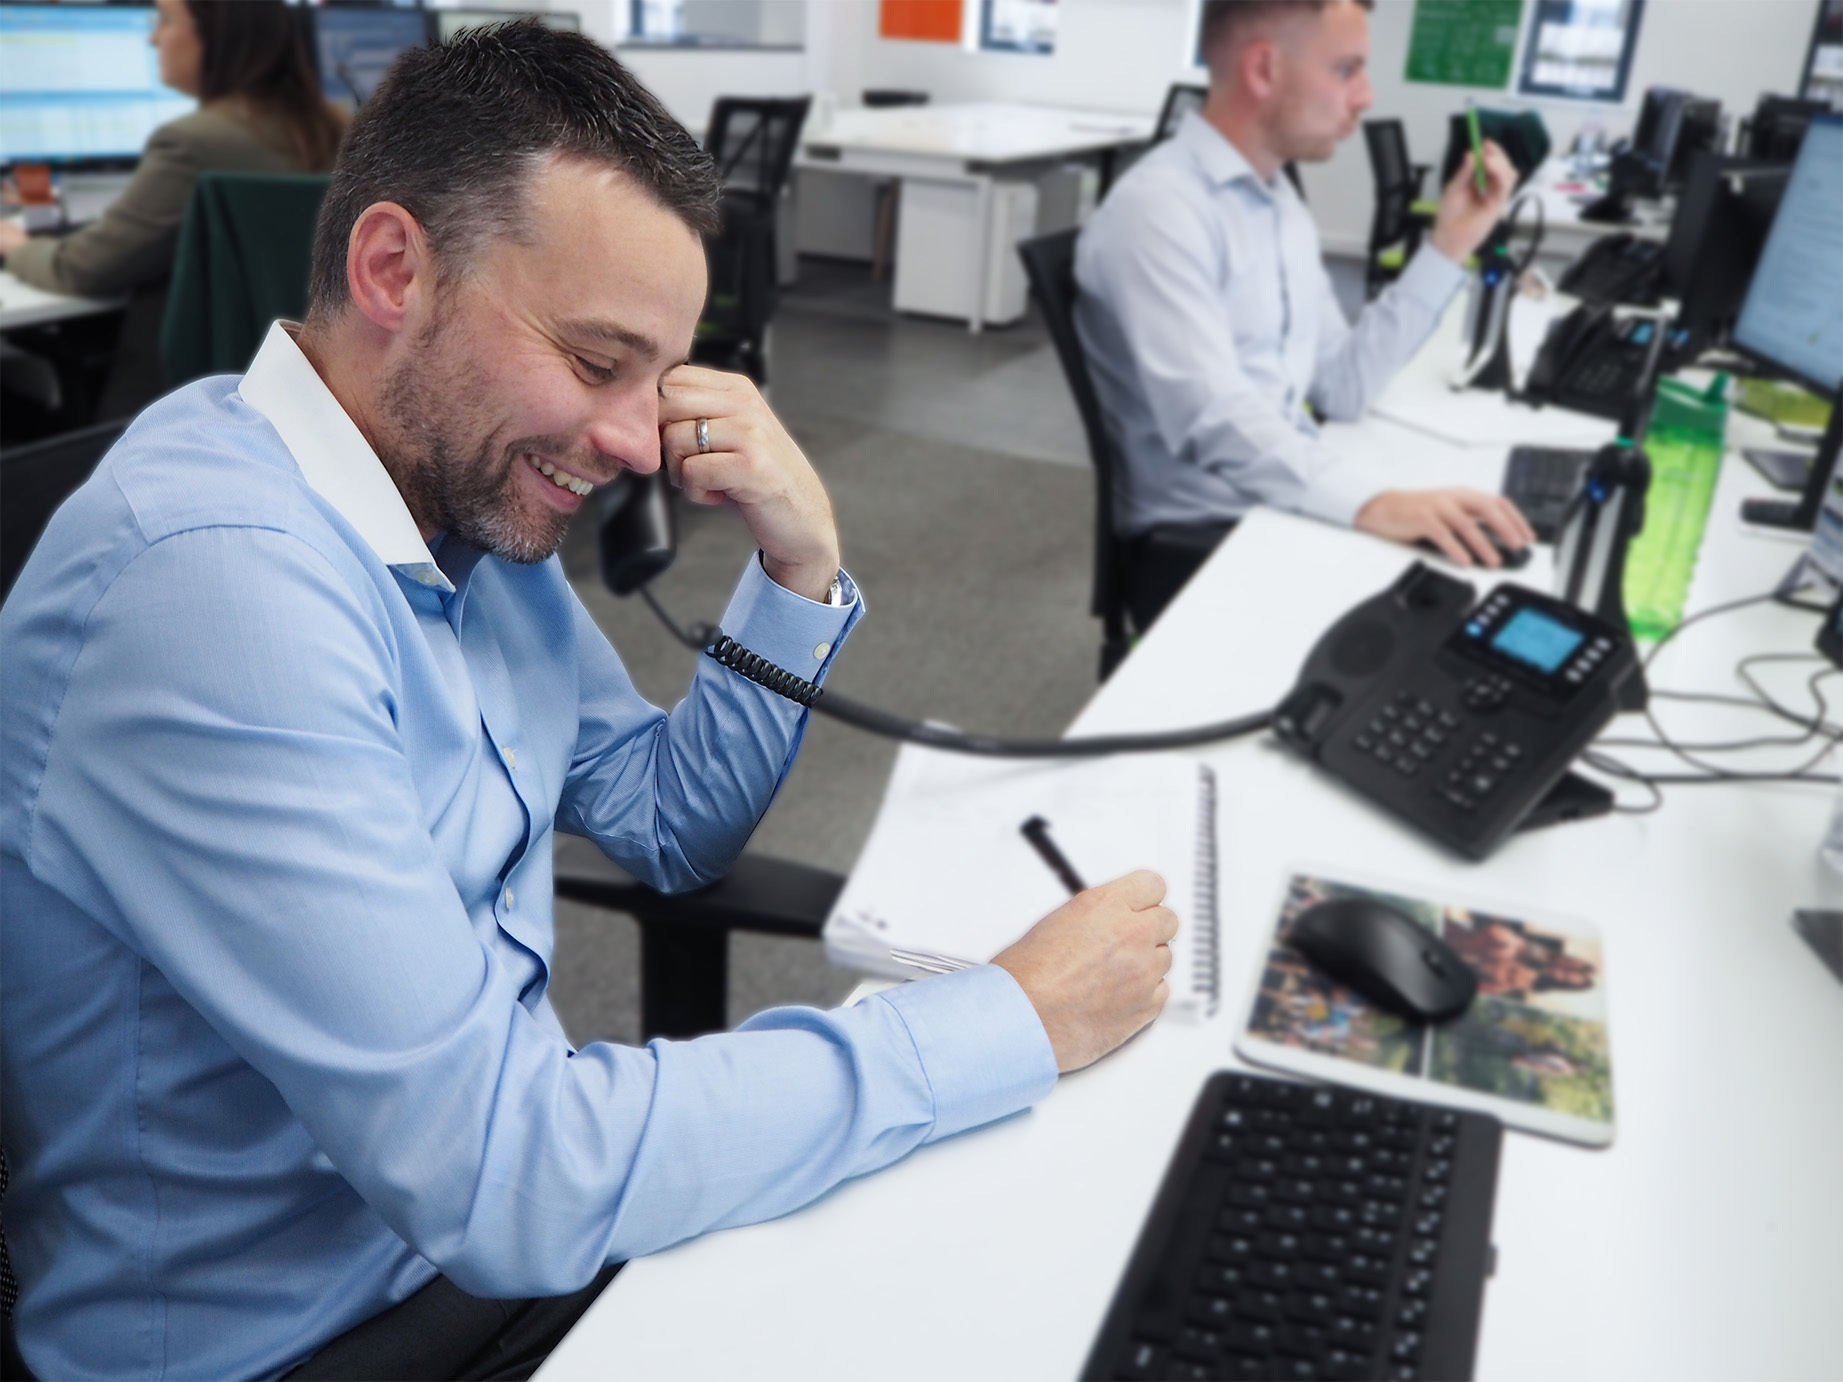 Mitchell smiles as he takes notes on a notepad, he's holding a phone in his hand speaking to a recruitment client. The Open-plan Prime appointments office is in the background.